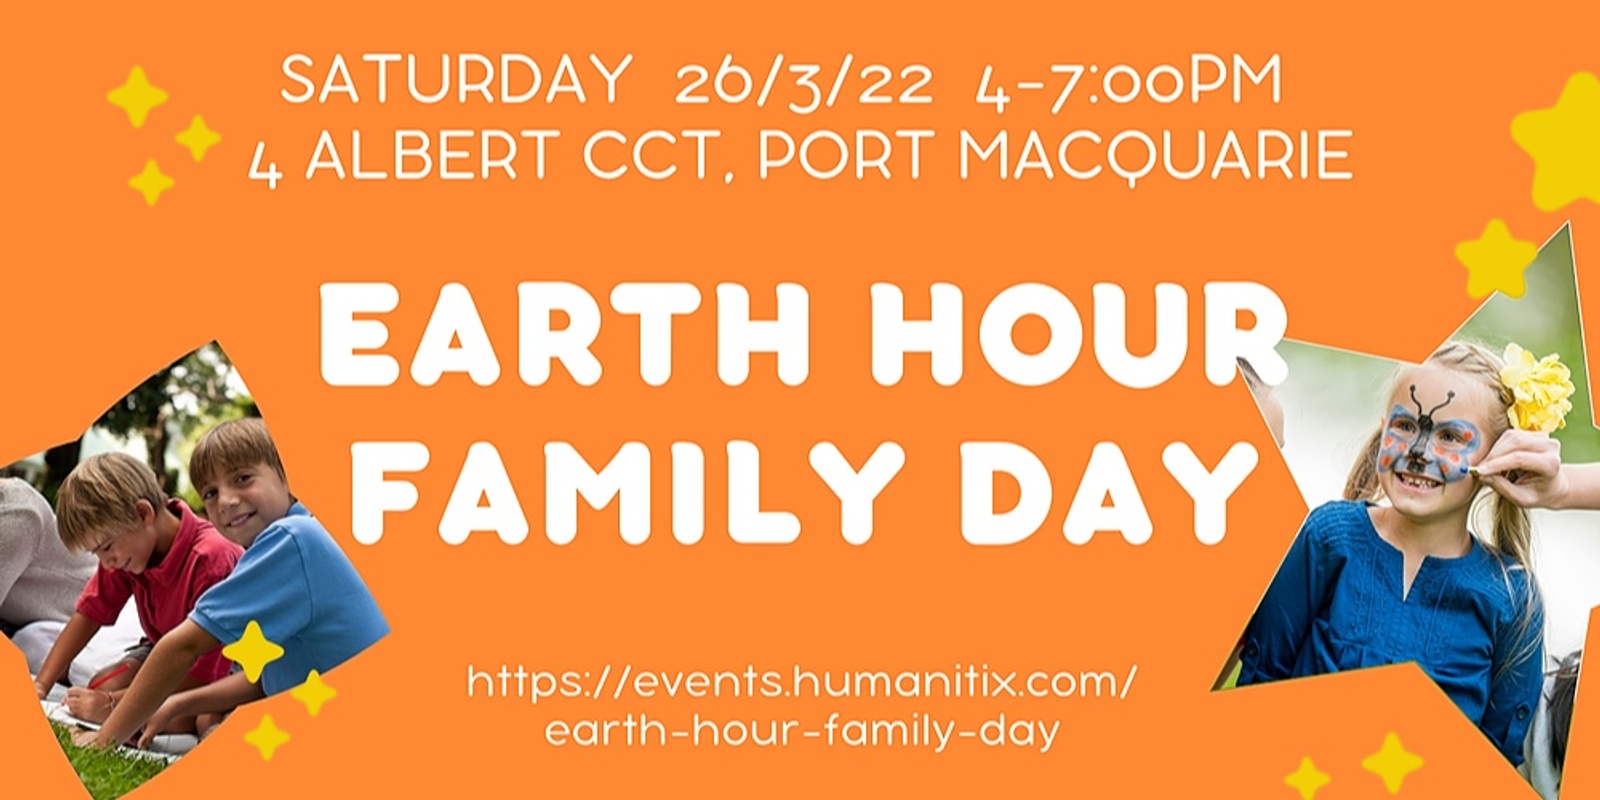 Banner image for Earth Hour Family Day